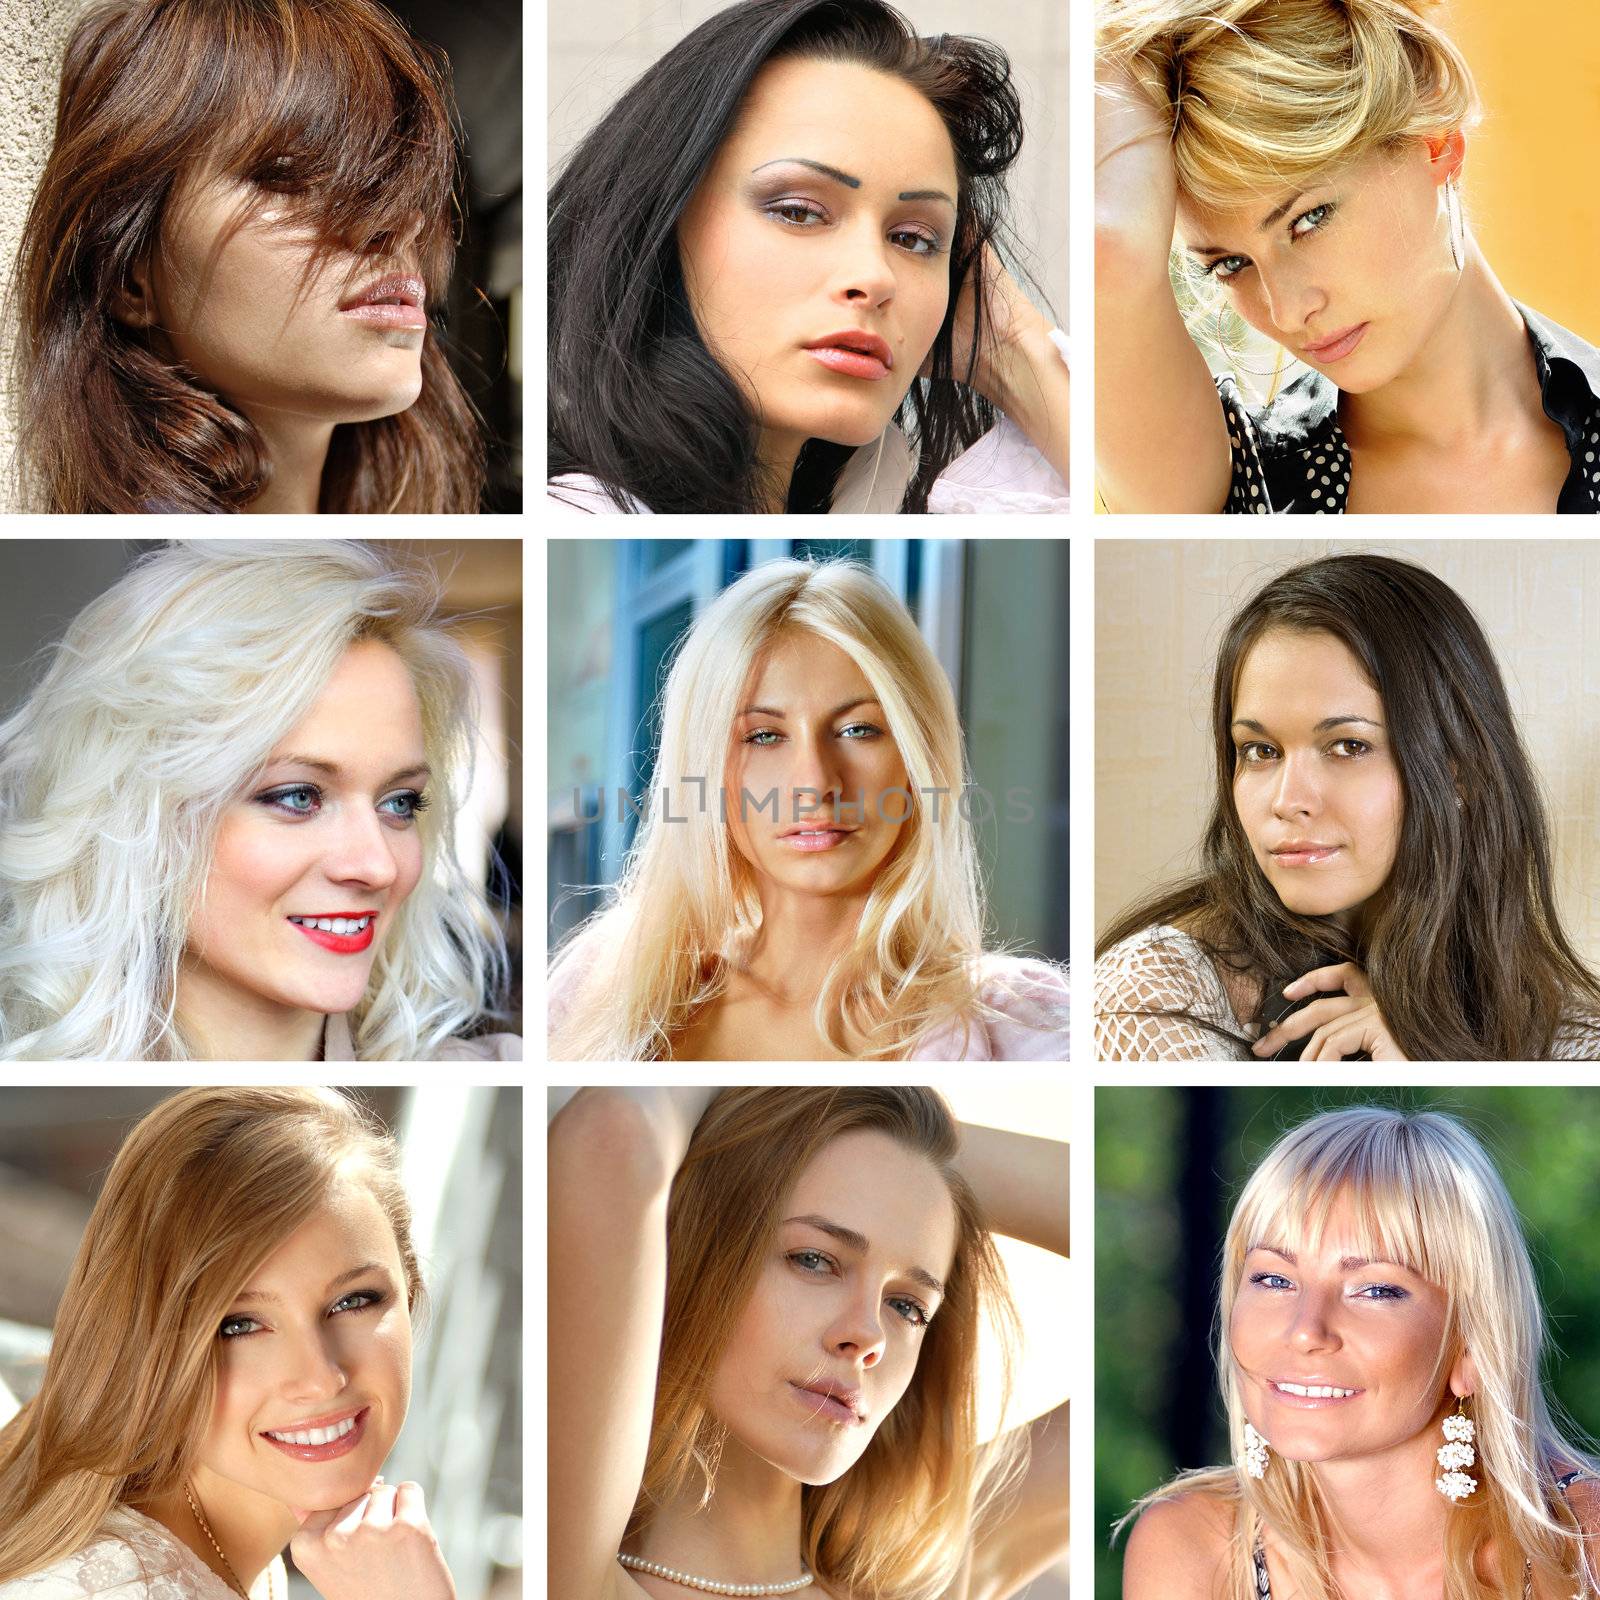 photo collage of beautiful faces of many women